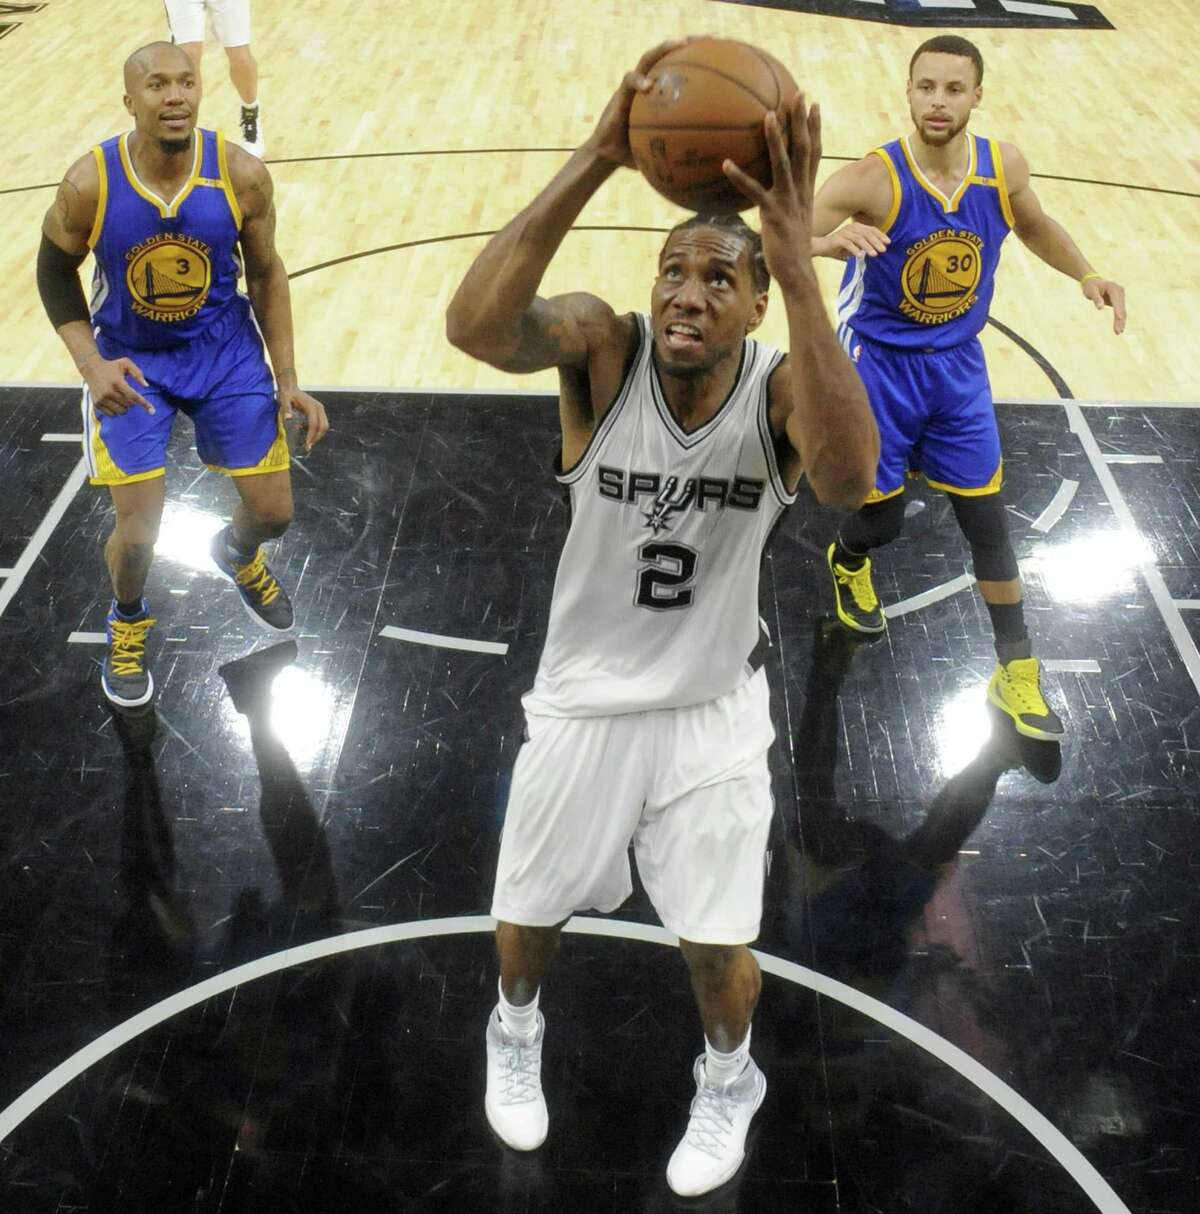 Spurs’ Kawhi Leonard shoots between the Golden State Warriors’ David West (left) and Stephen Curry on March 29, 2017 at the AT&T Center. The Warriors won 110-98.